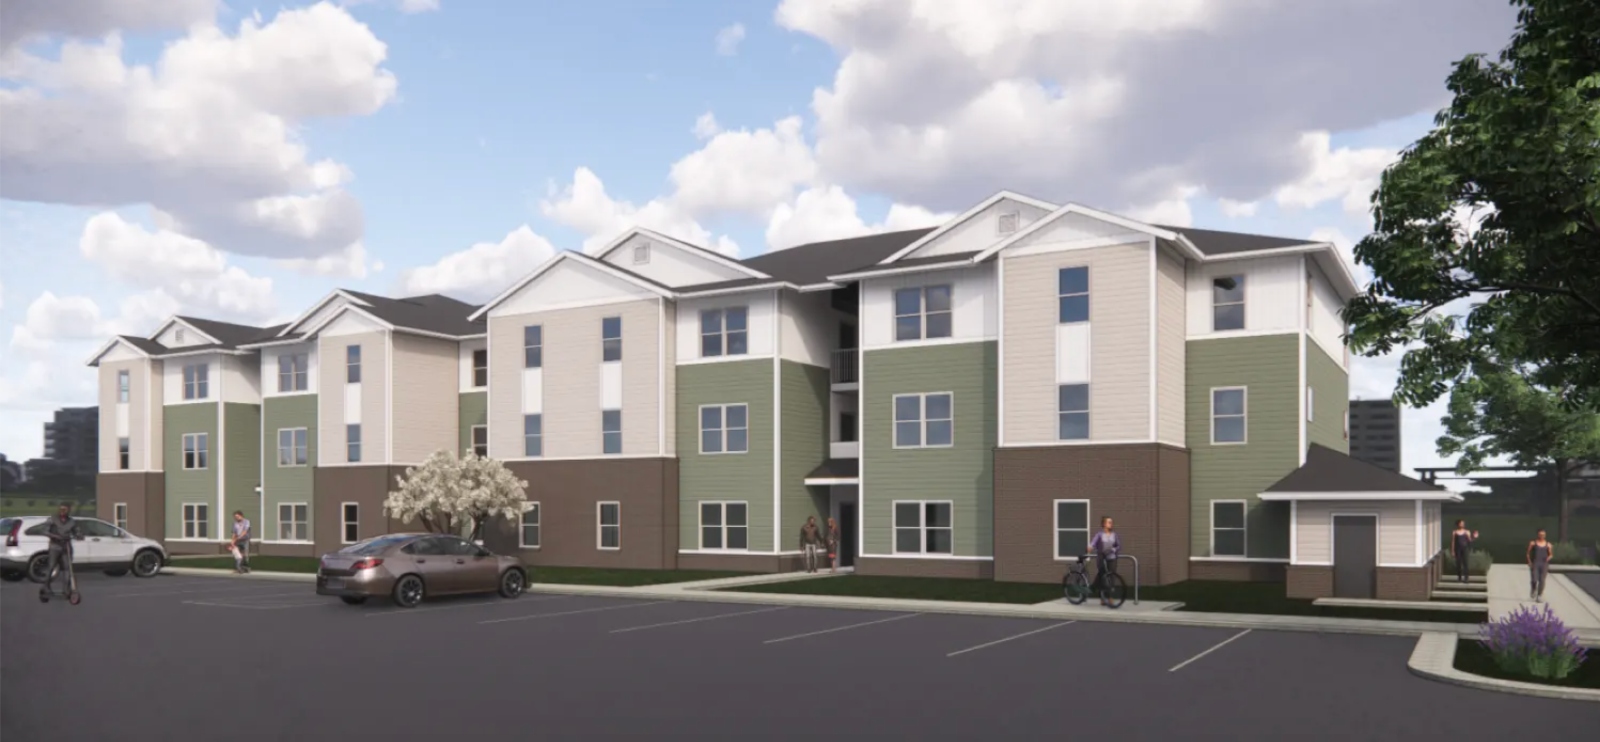 A rendering of the Palatine Meadows apartment complex in New Bern. The 60-unit affordable development will open later this spring, more than five years after Hurricane Florence.